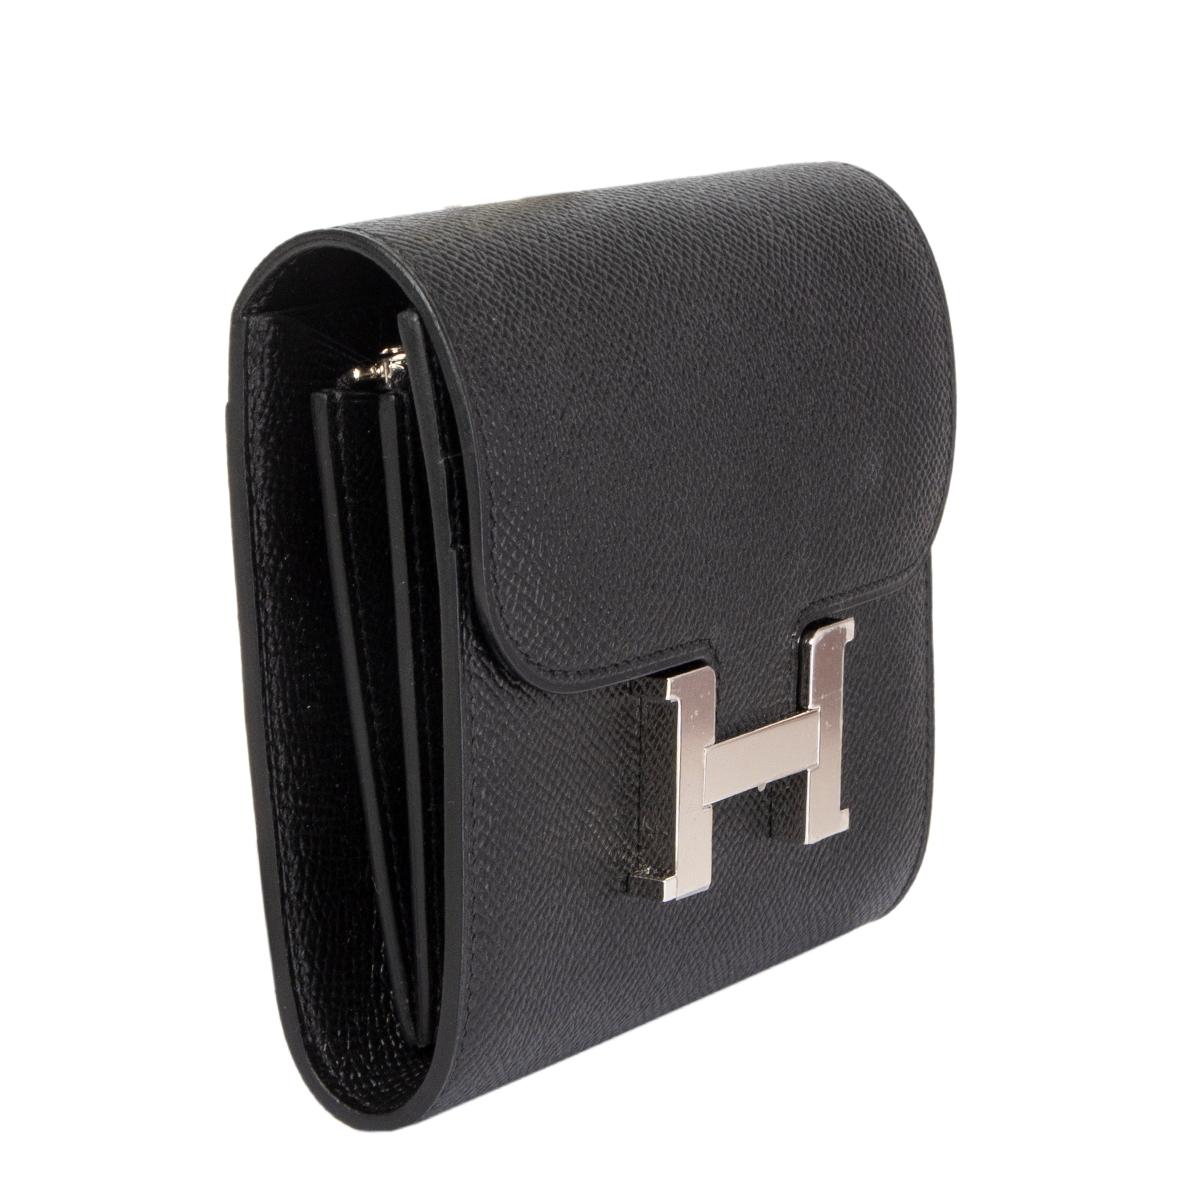 Hermes 'Constance Compact' wallet in Noir (black) Veau Epsom leather with Palladium H closure. Two credit card slots and a full-size pocket on the front under the flap. Lined in black Veau Swift with two credit card slots and a full-size pocket